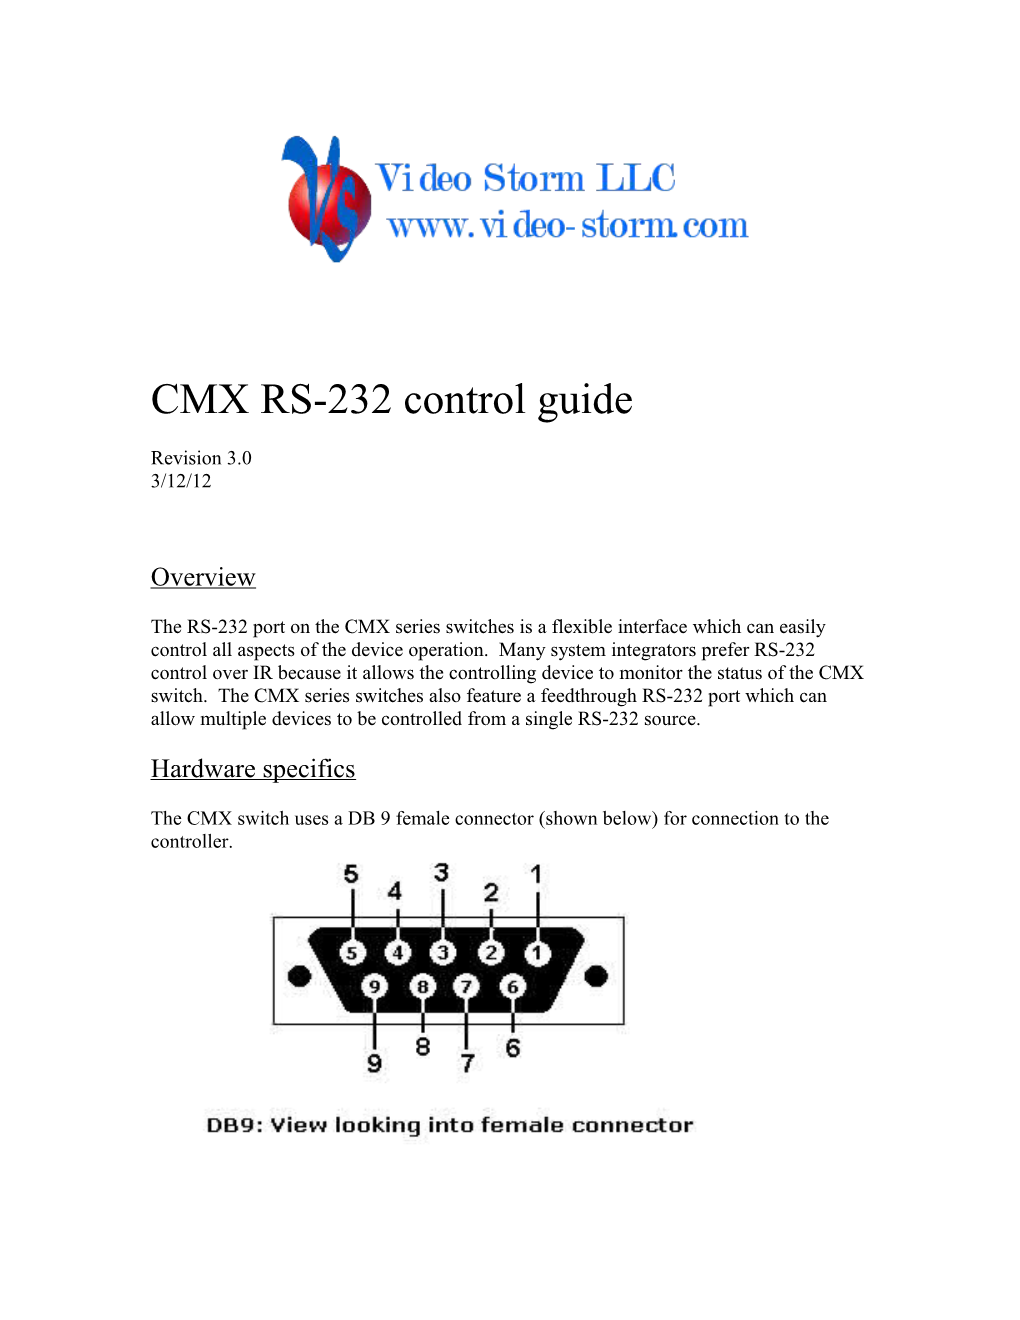 CMX RS-232 Control Guide